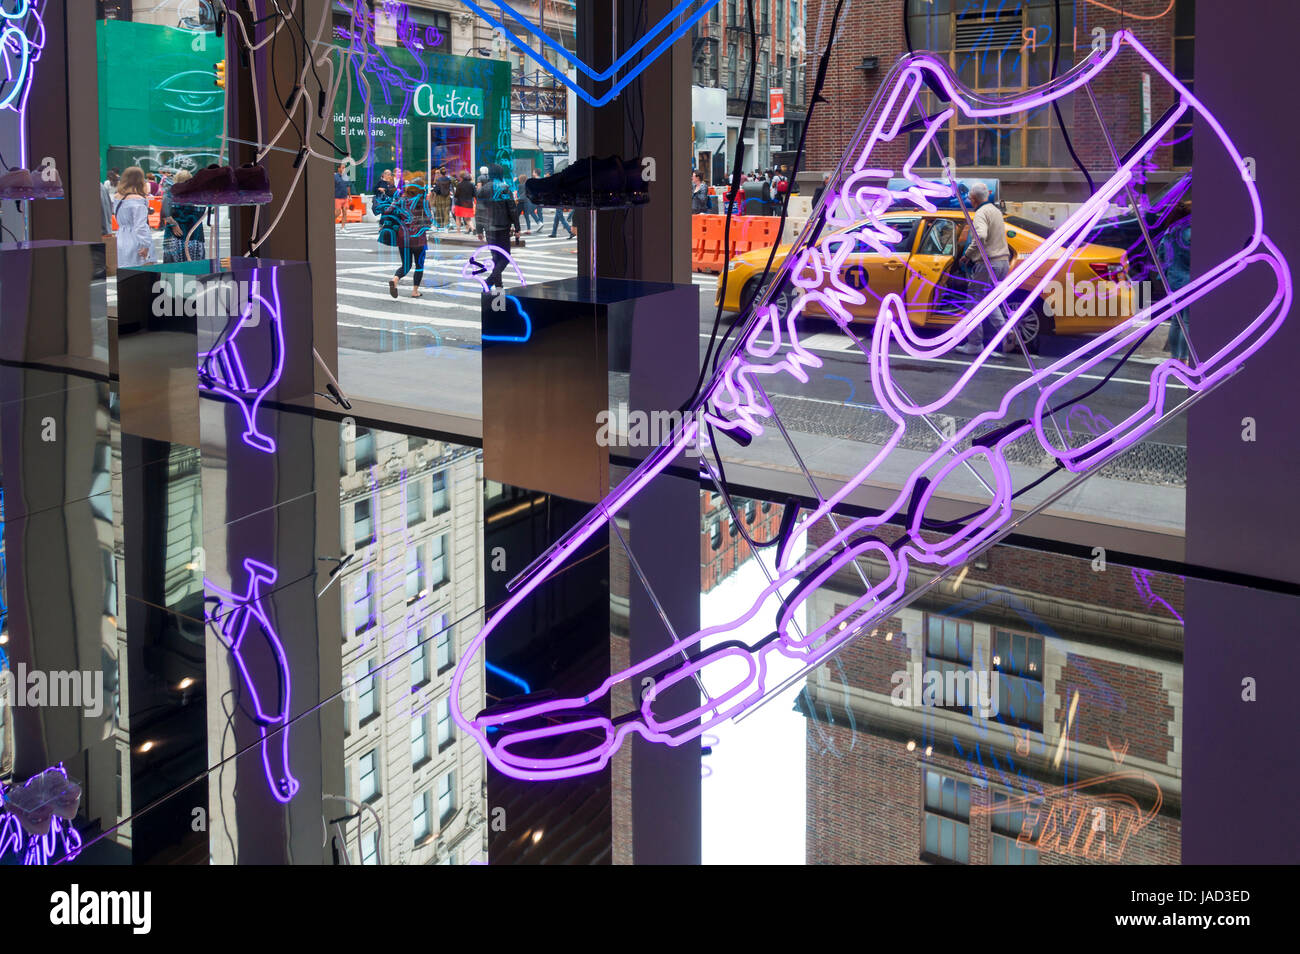 A multi-leveled view from inside the Nike showplace store in SoHo, New York City displays neon illustrations, reflections, and life on Spring Street Stock Photo